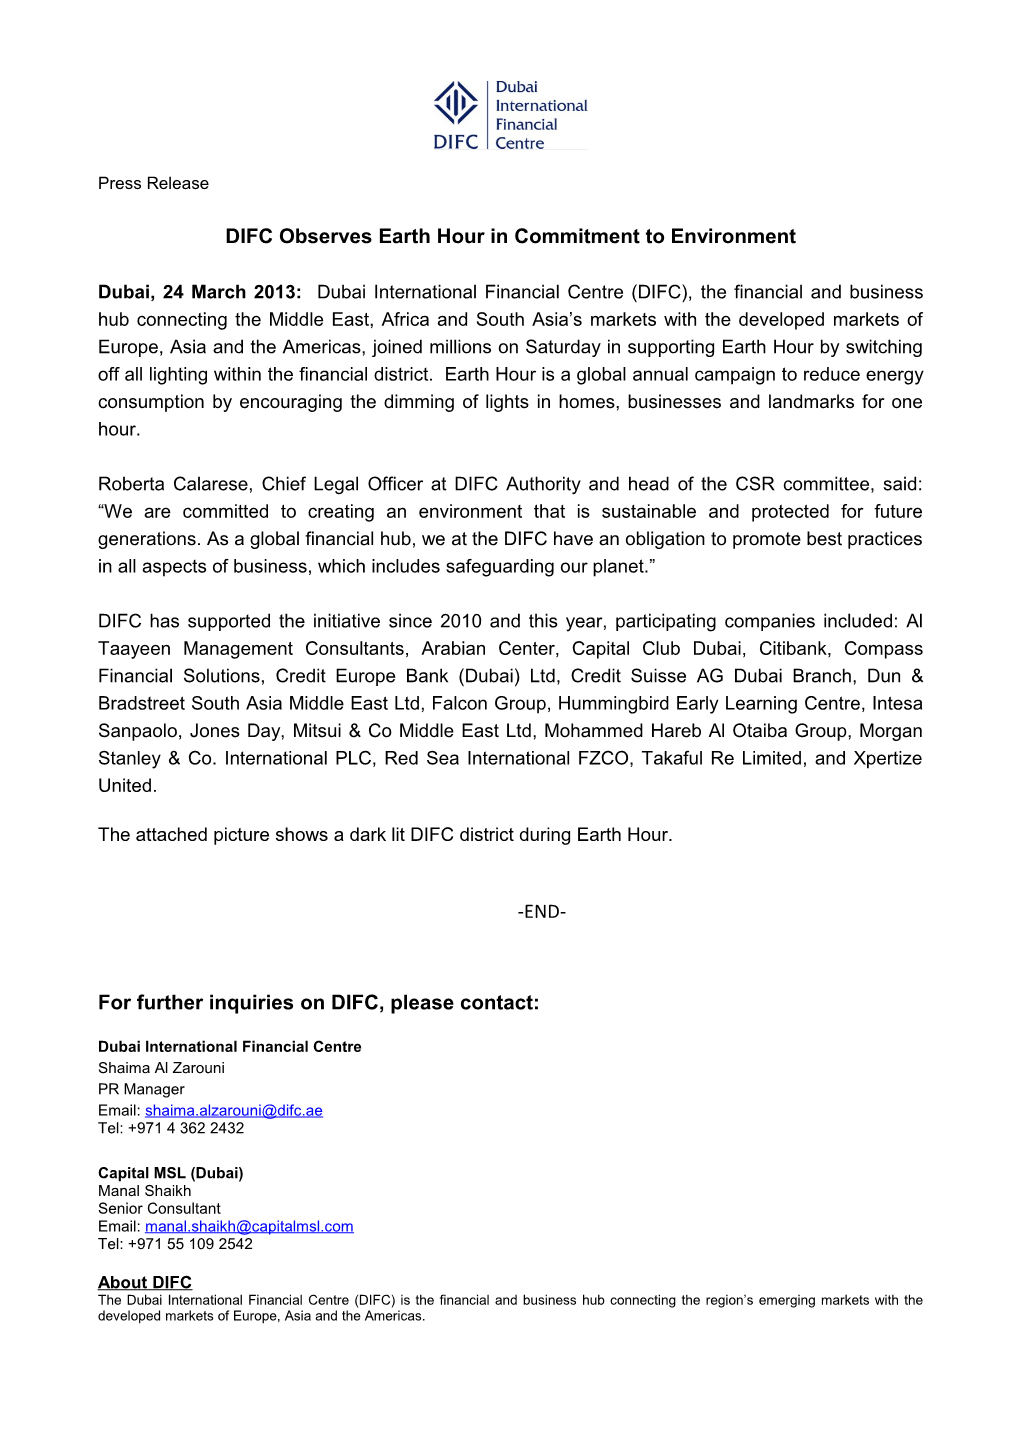 DIFC Observes Earth Hour in Commitment to Environment